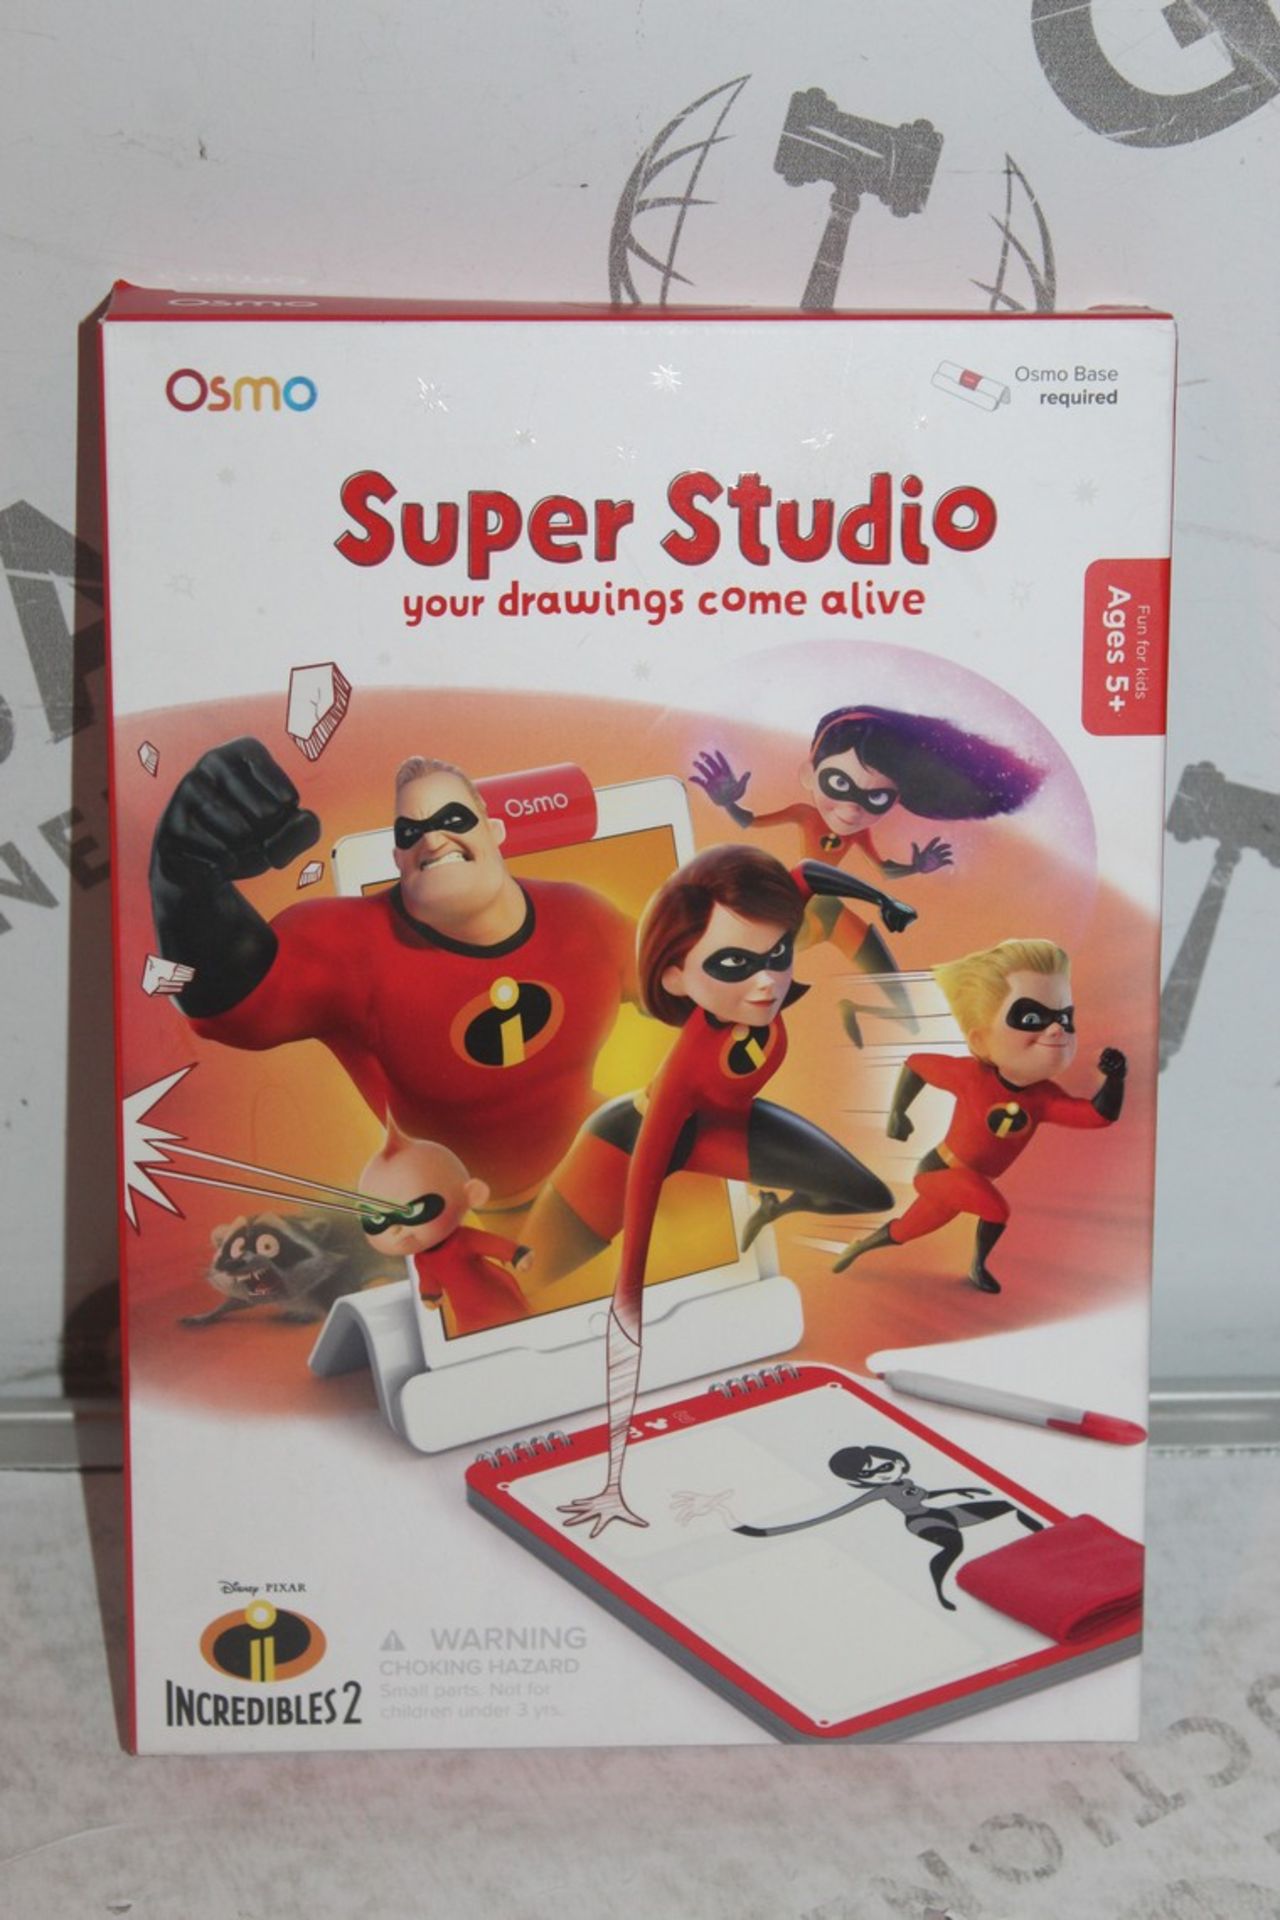 Lot to Contain 5 Osmo Super Studio Drawings Come to Life Incredibles Drawing Games Combined RRP £